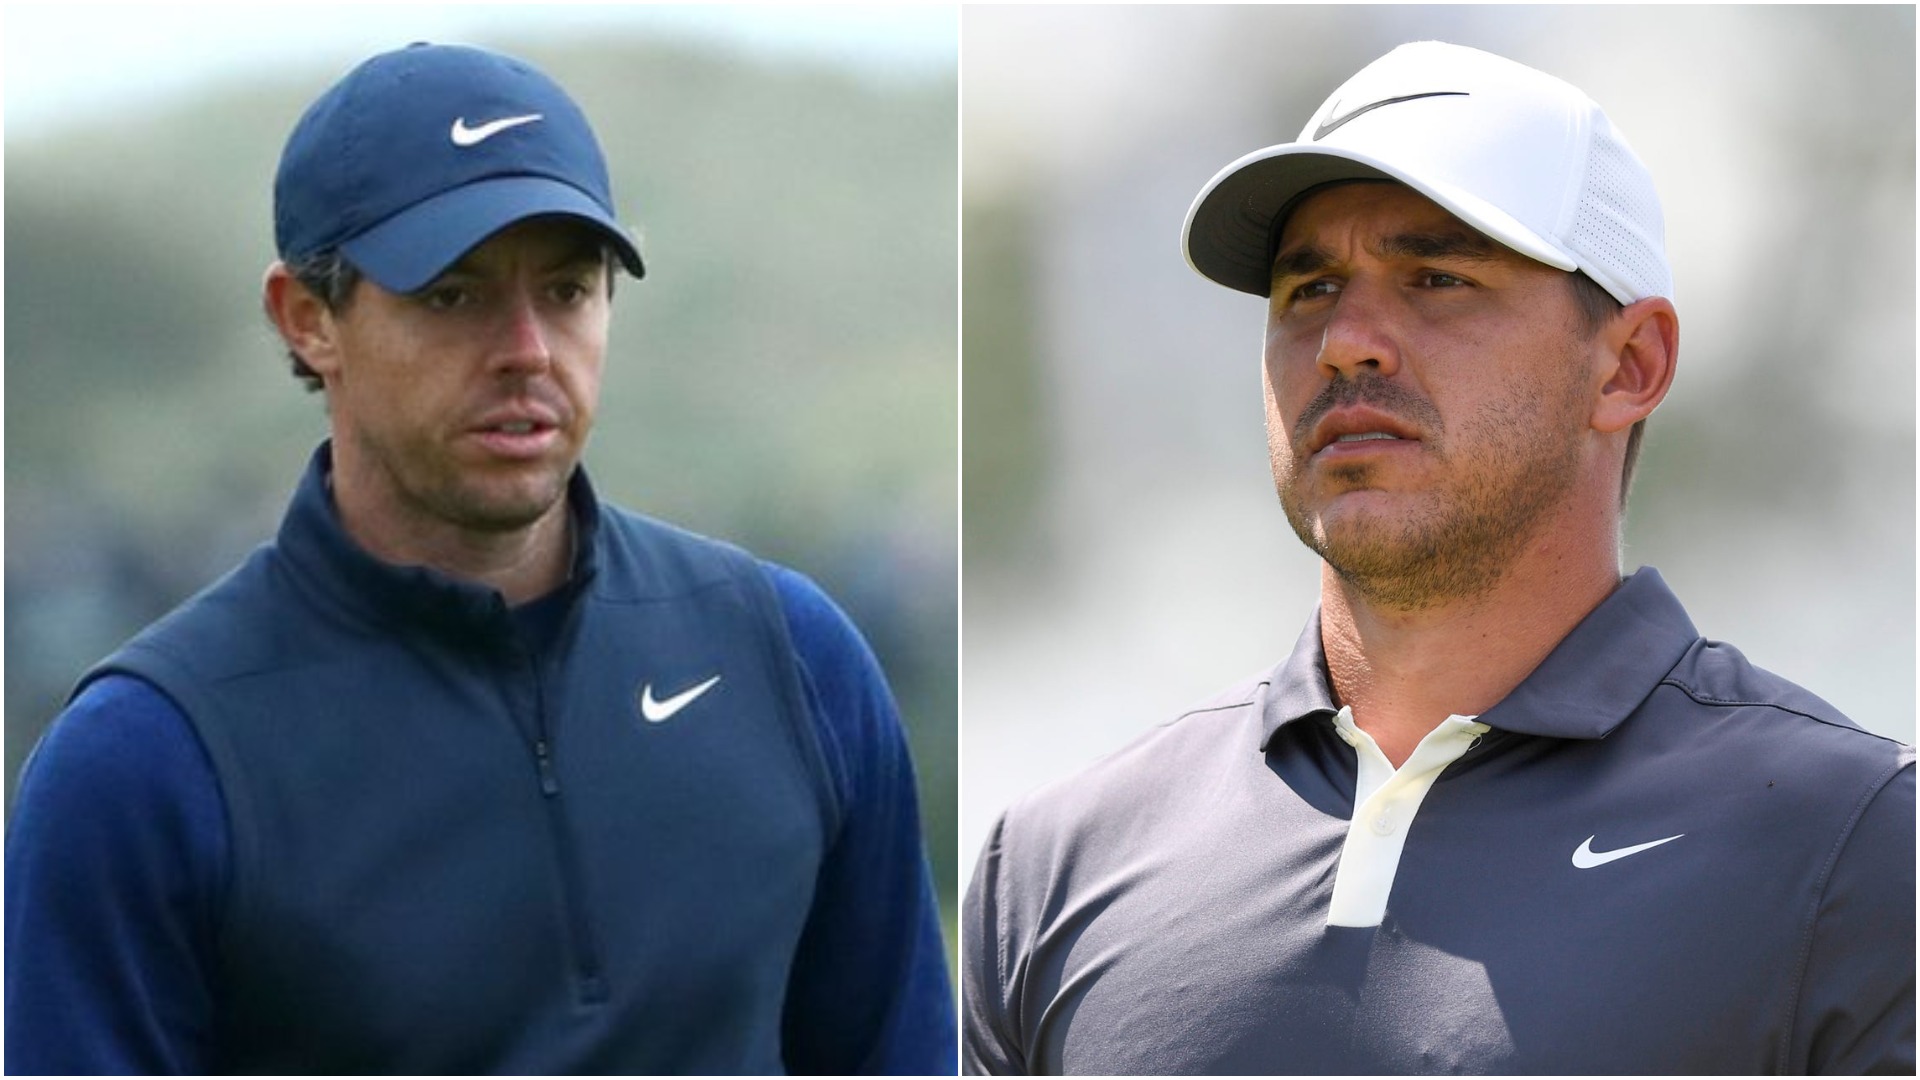 Rory McIlroy responds to Brooks Koepka's controversial comments